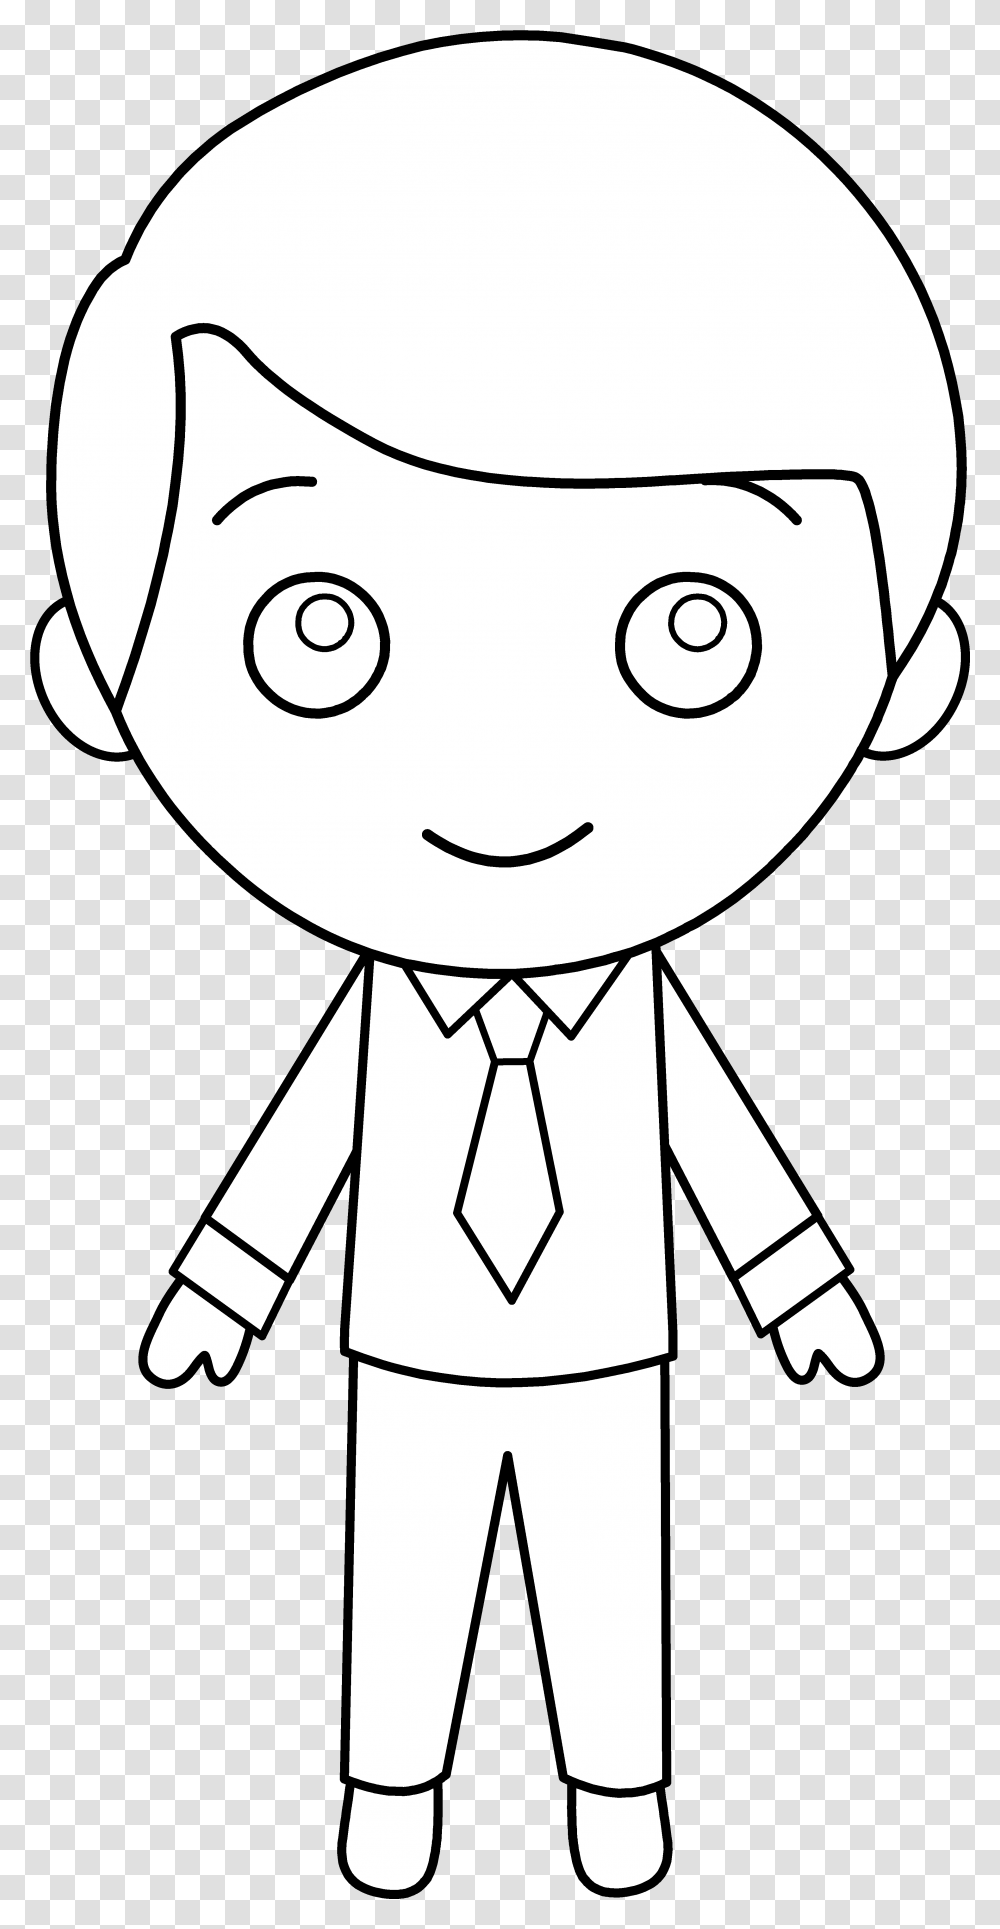 Download Hd Little Guy In Suit Line Art Black And White Boy Cartoon Black Background, Stencil, Drawing, Performer, Doodle Transparent Png